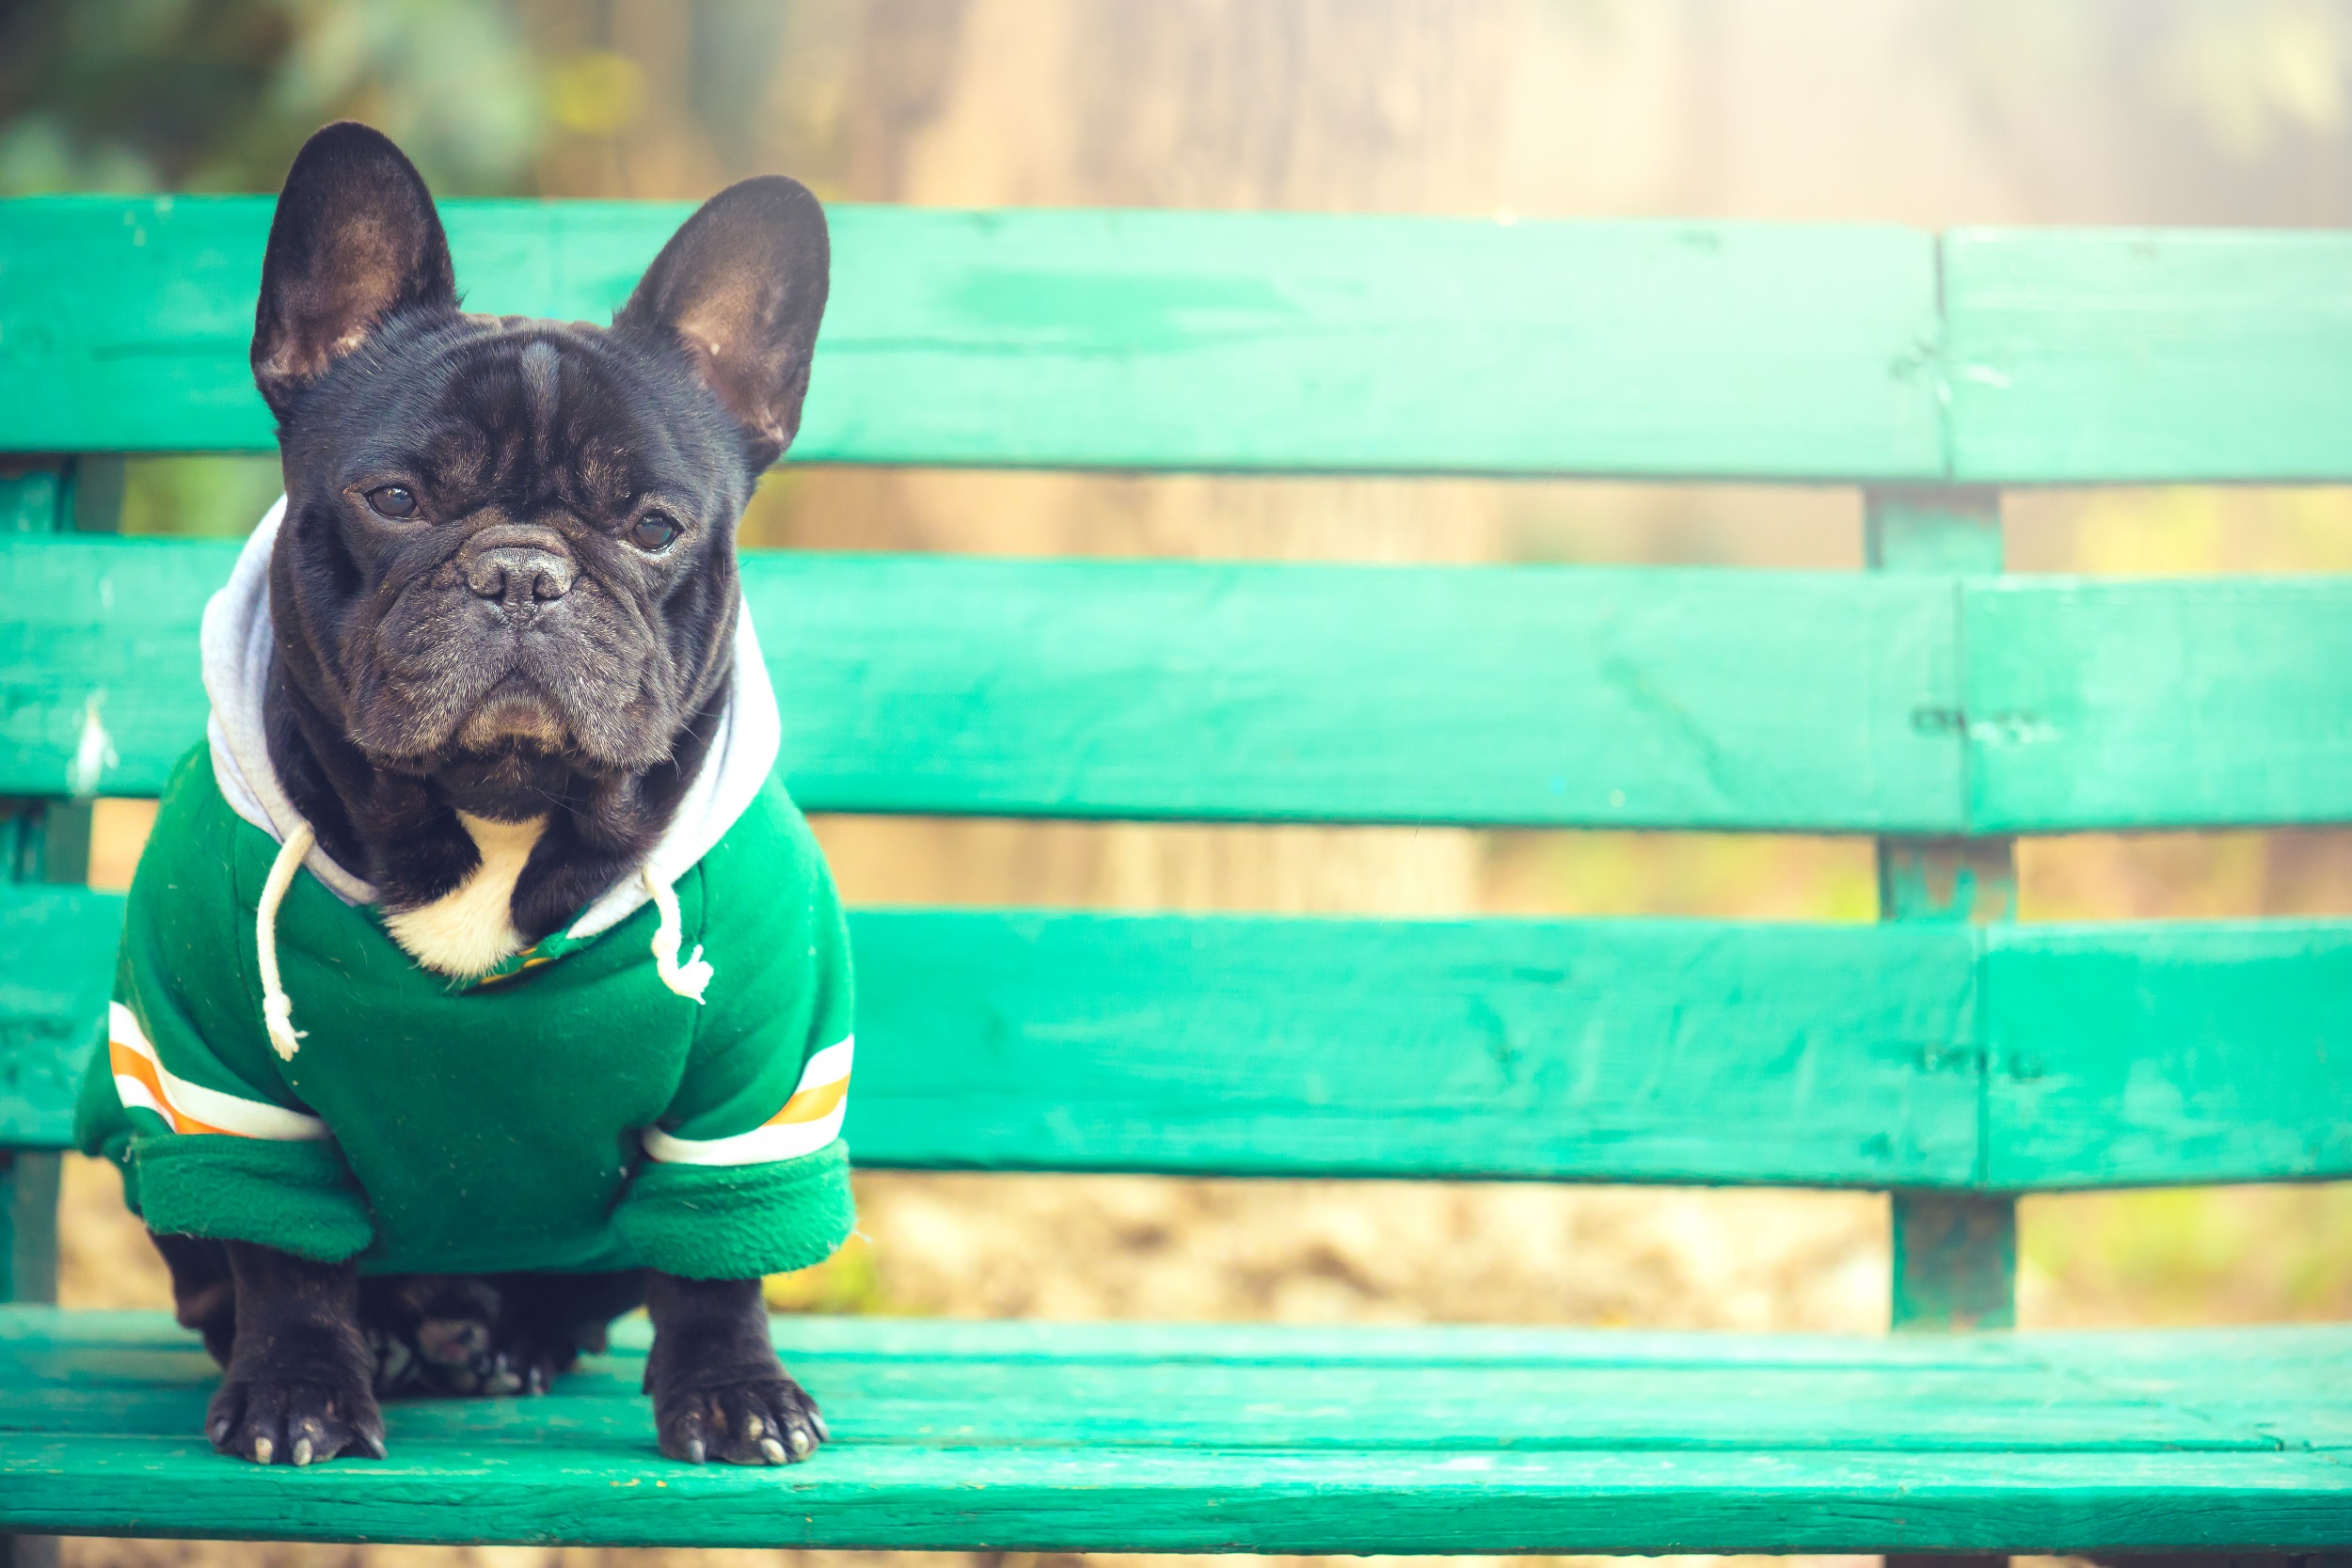 Frenchie sitting on a green bench